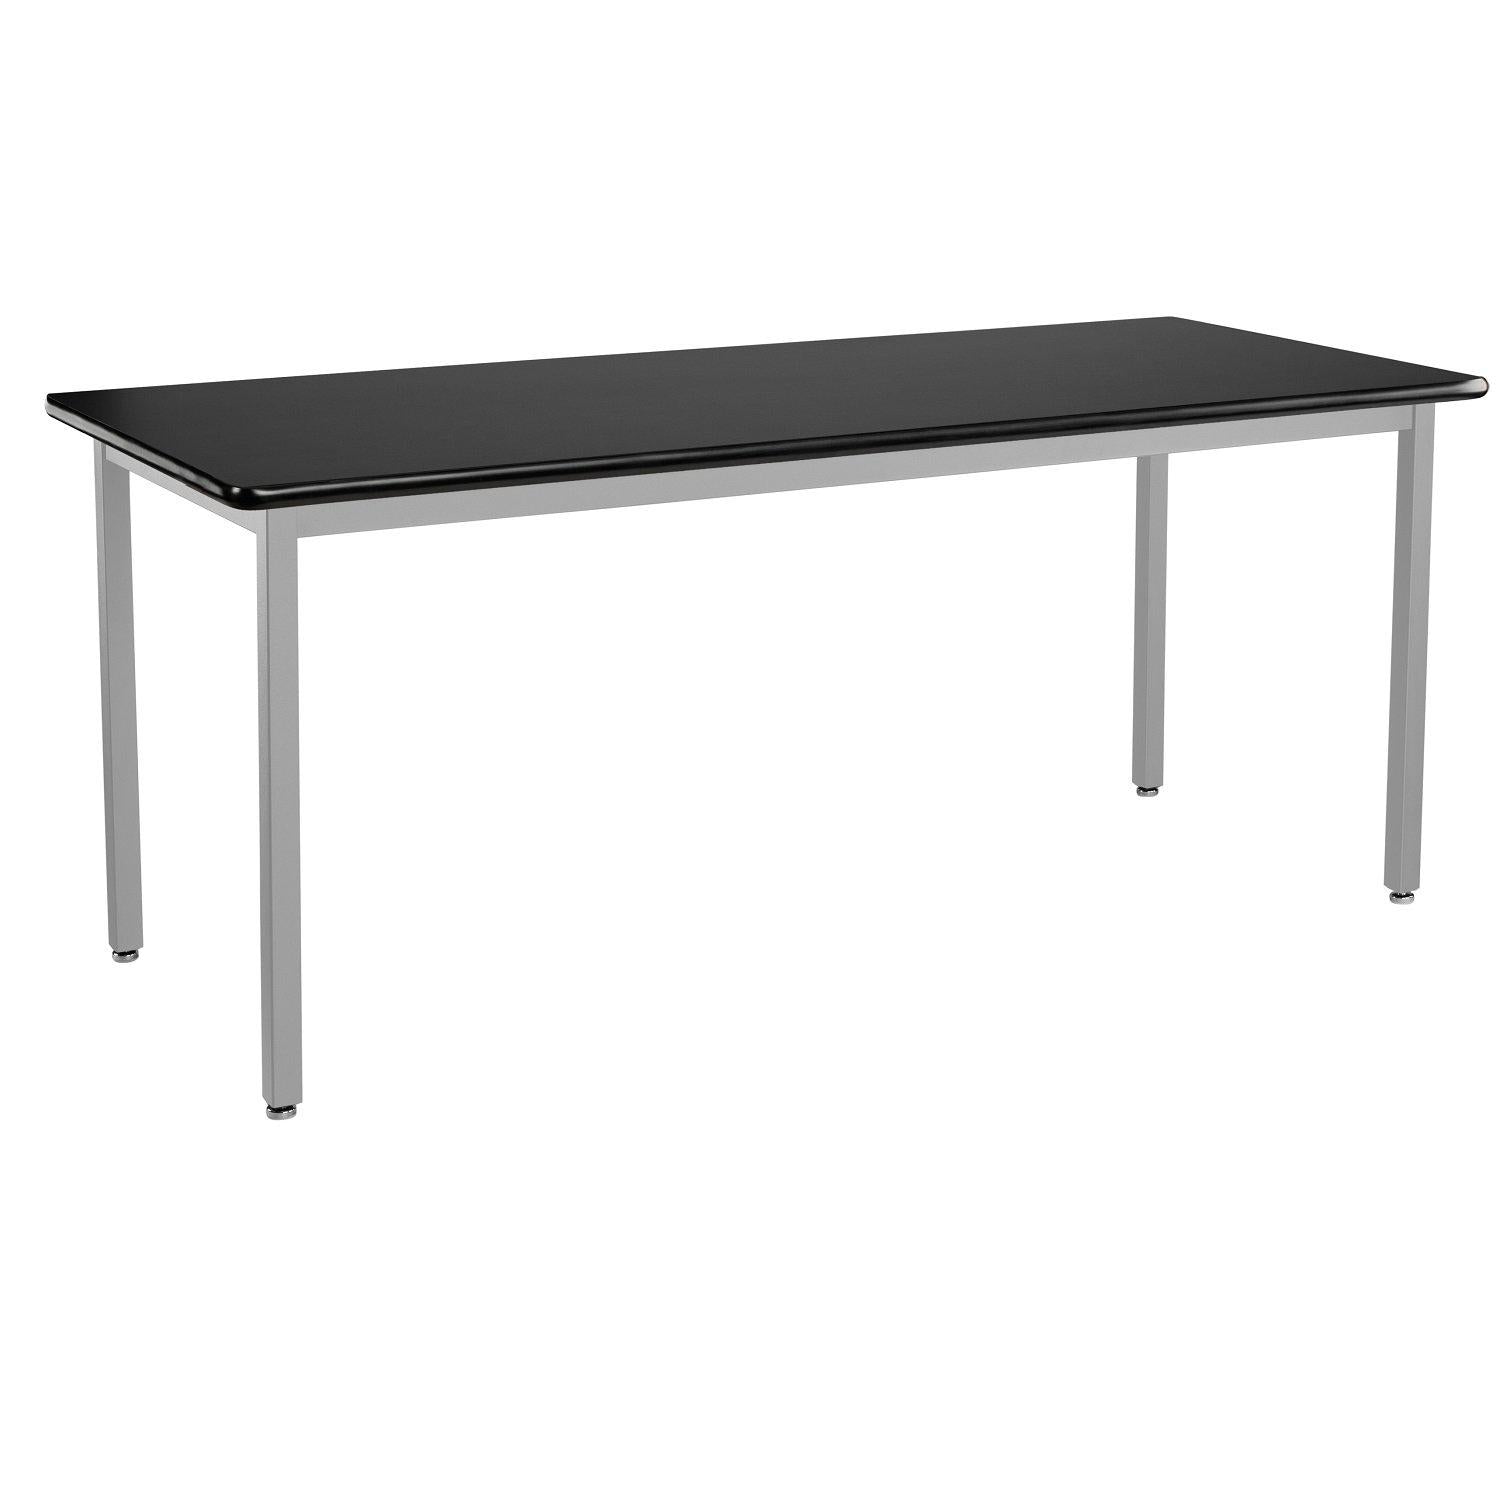 Heavy-Duty Fixed Height Utility Table, Soft Grey Frame, 24" x 84", High-Pressure Laminate Top with T-Mold Edge